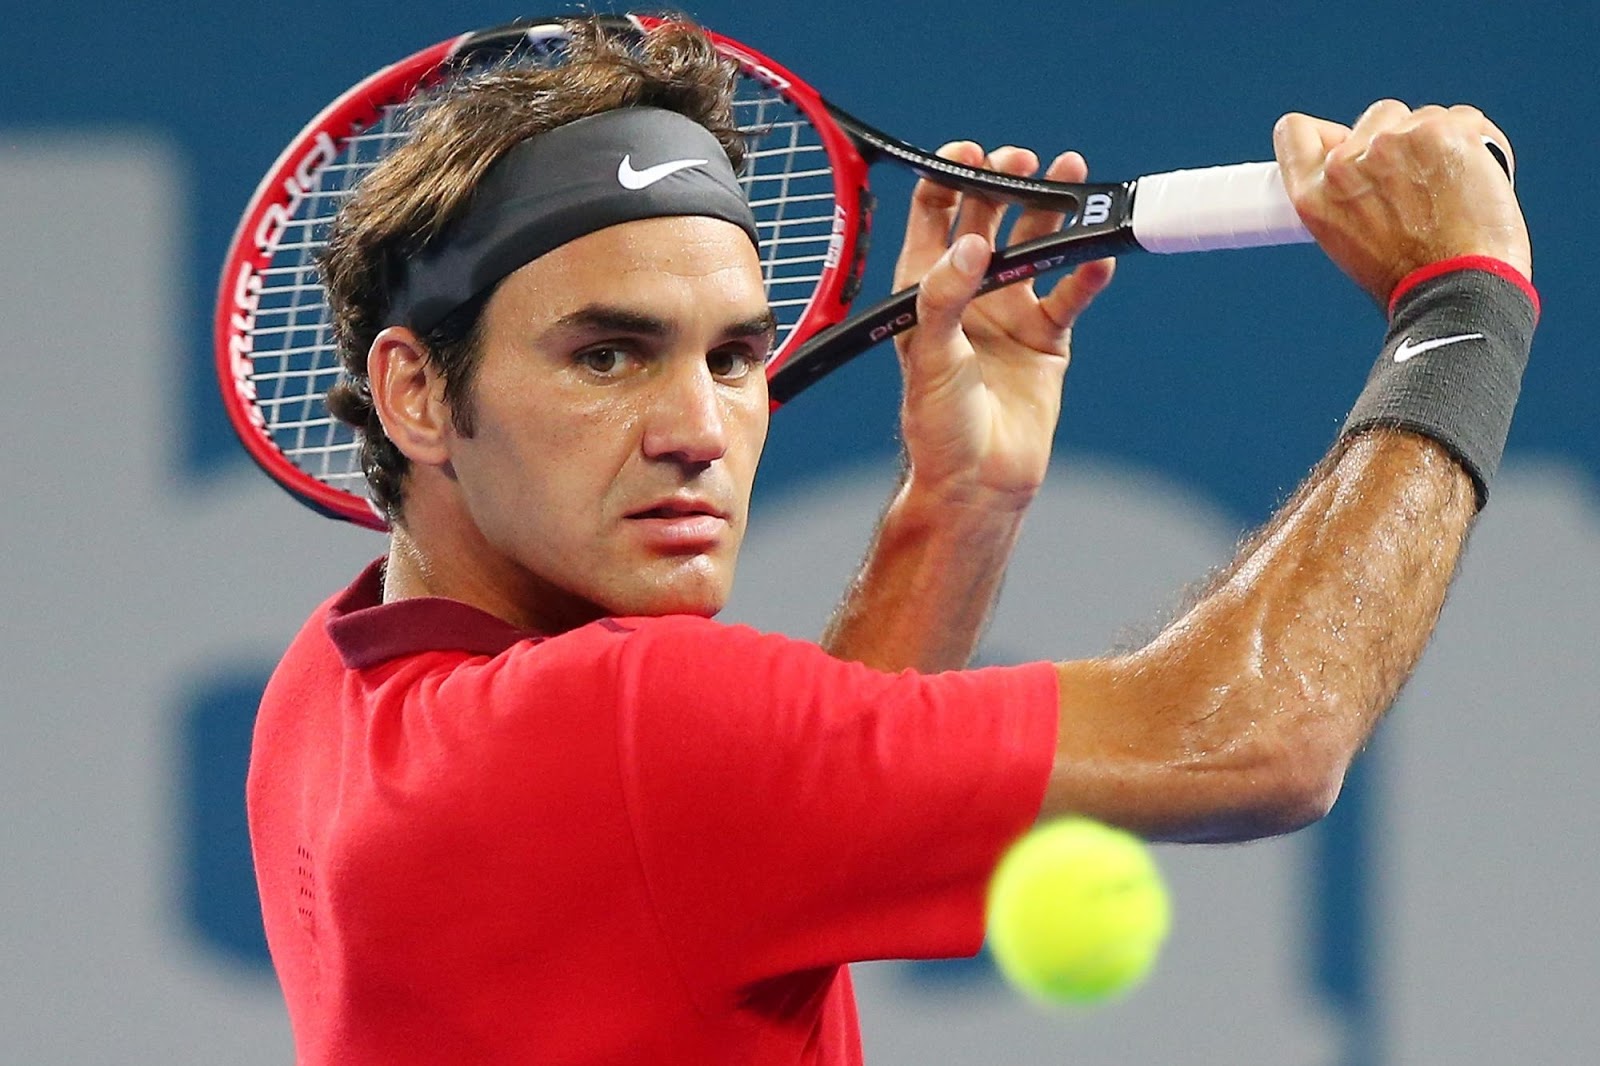 Roger Federer Im Fully Ready For The Australian Open Return After My Knee Surgeries